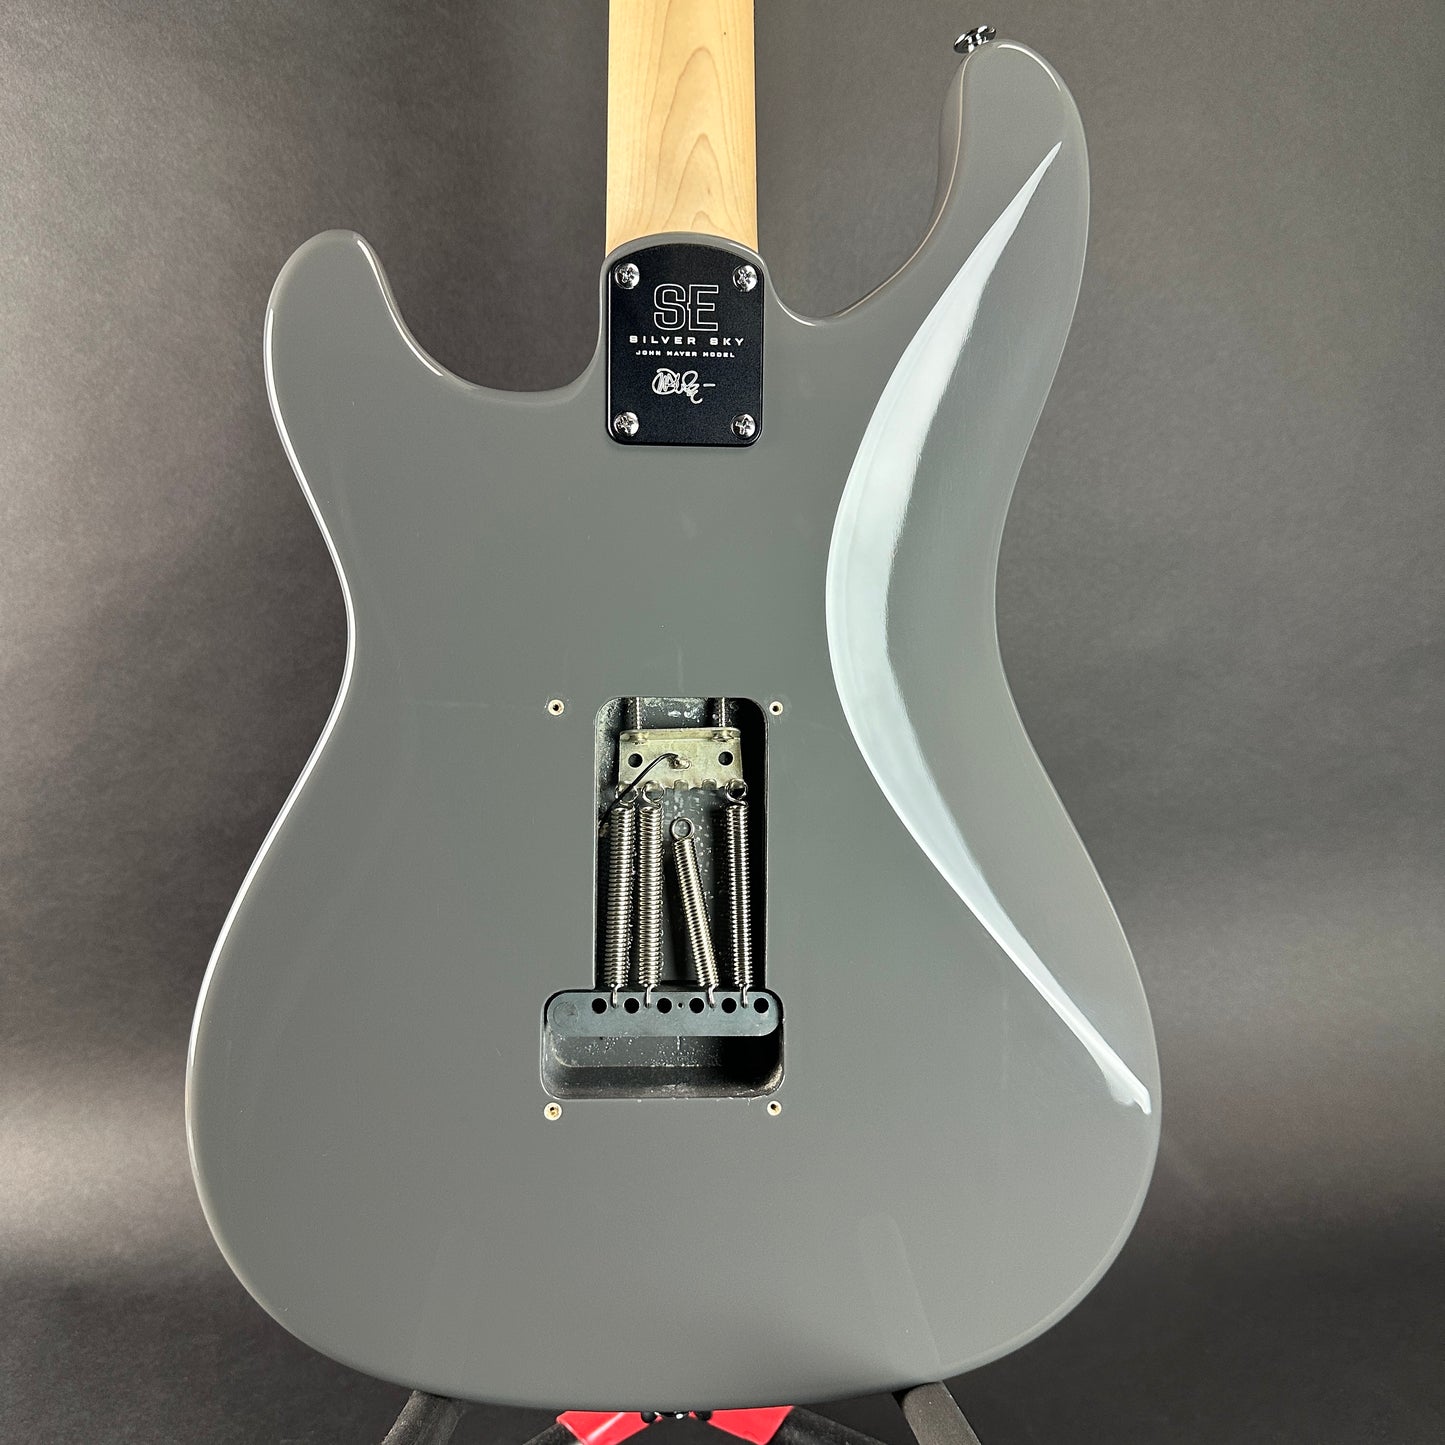 Back of Used PRS SE Silver Sky Stone Gray.